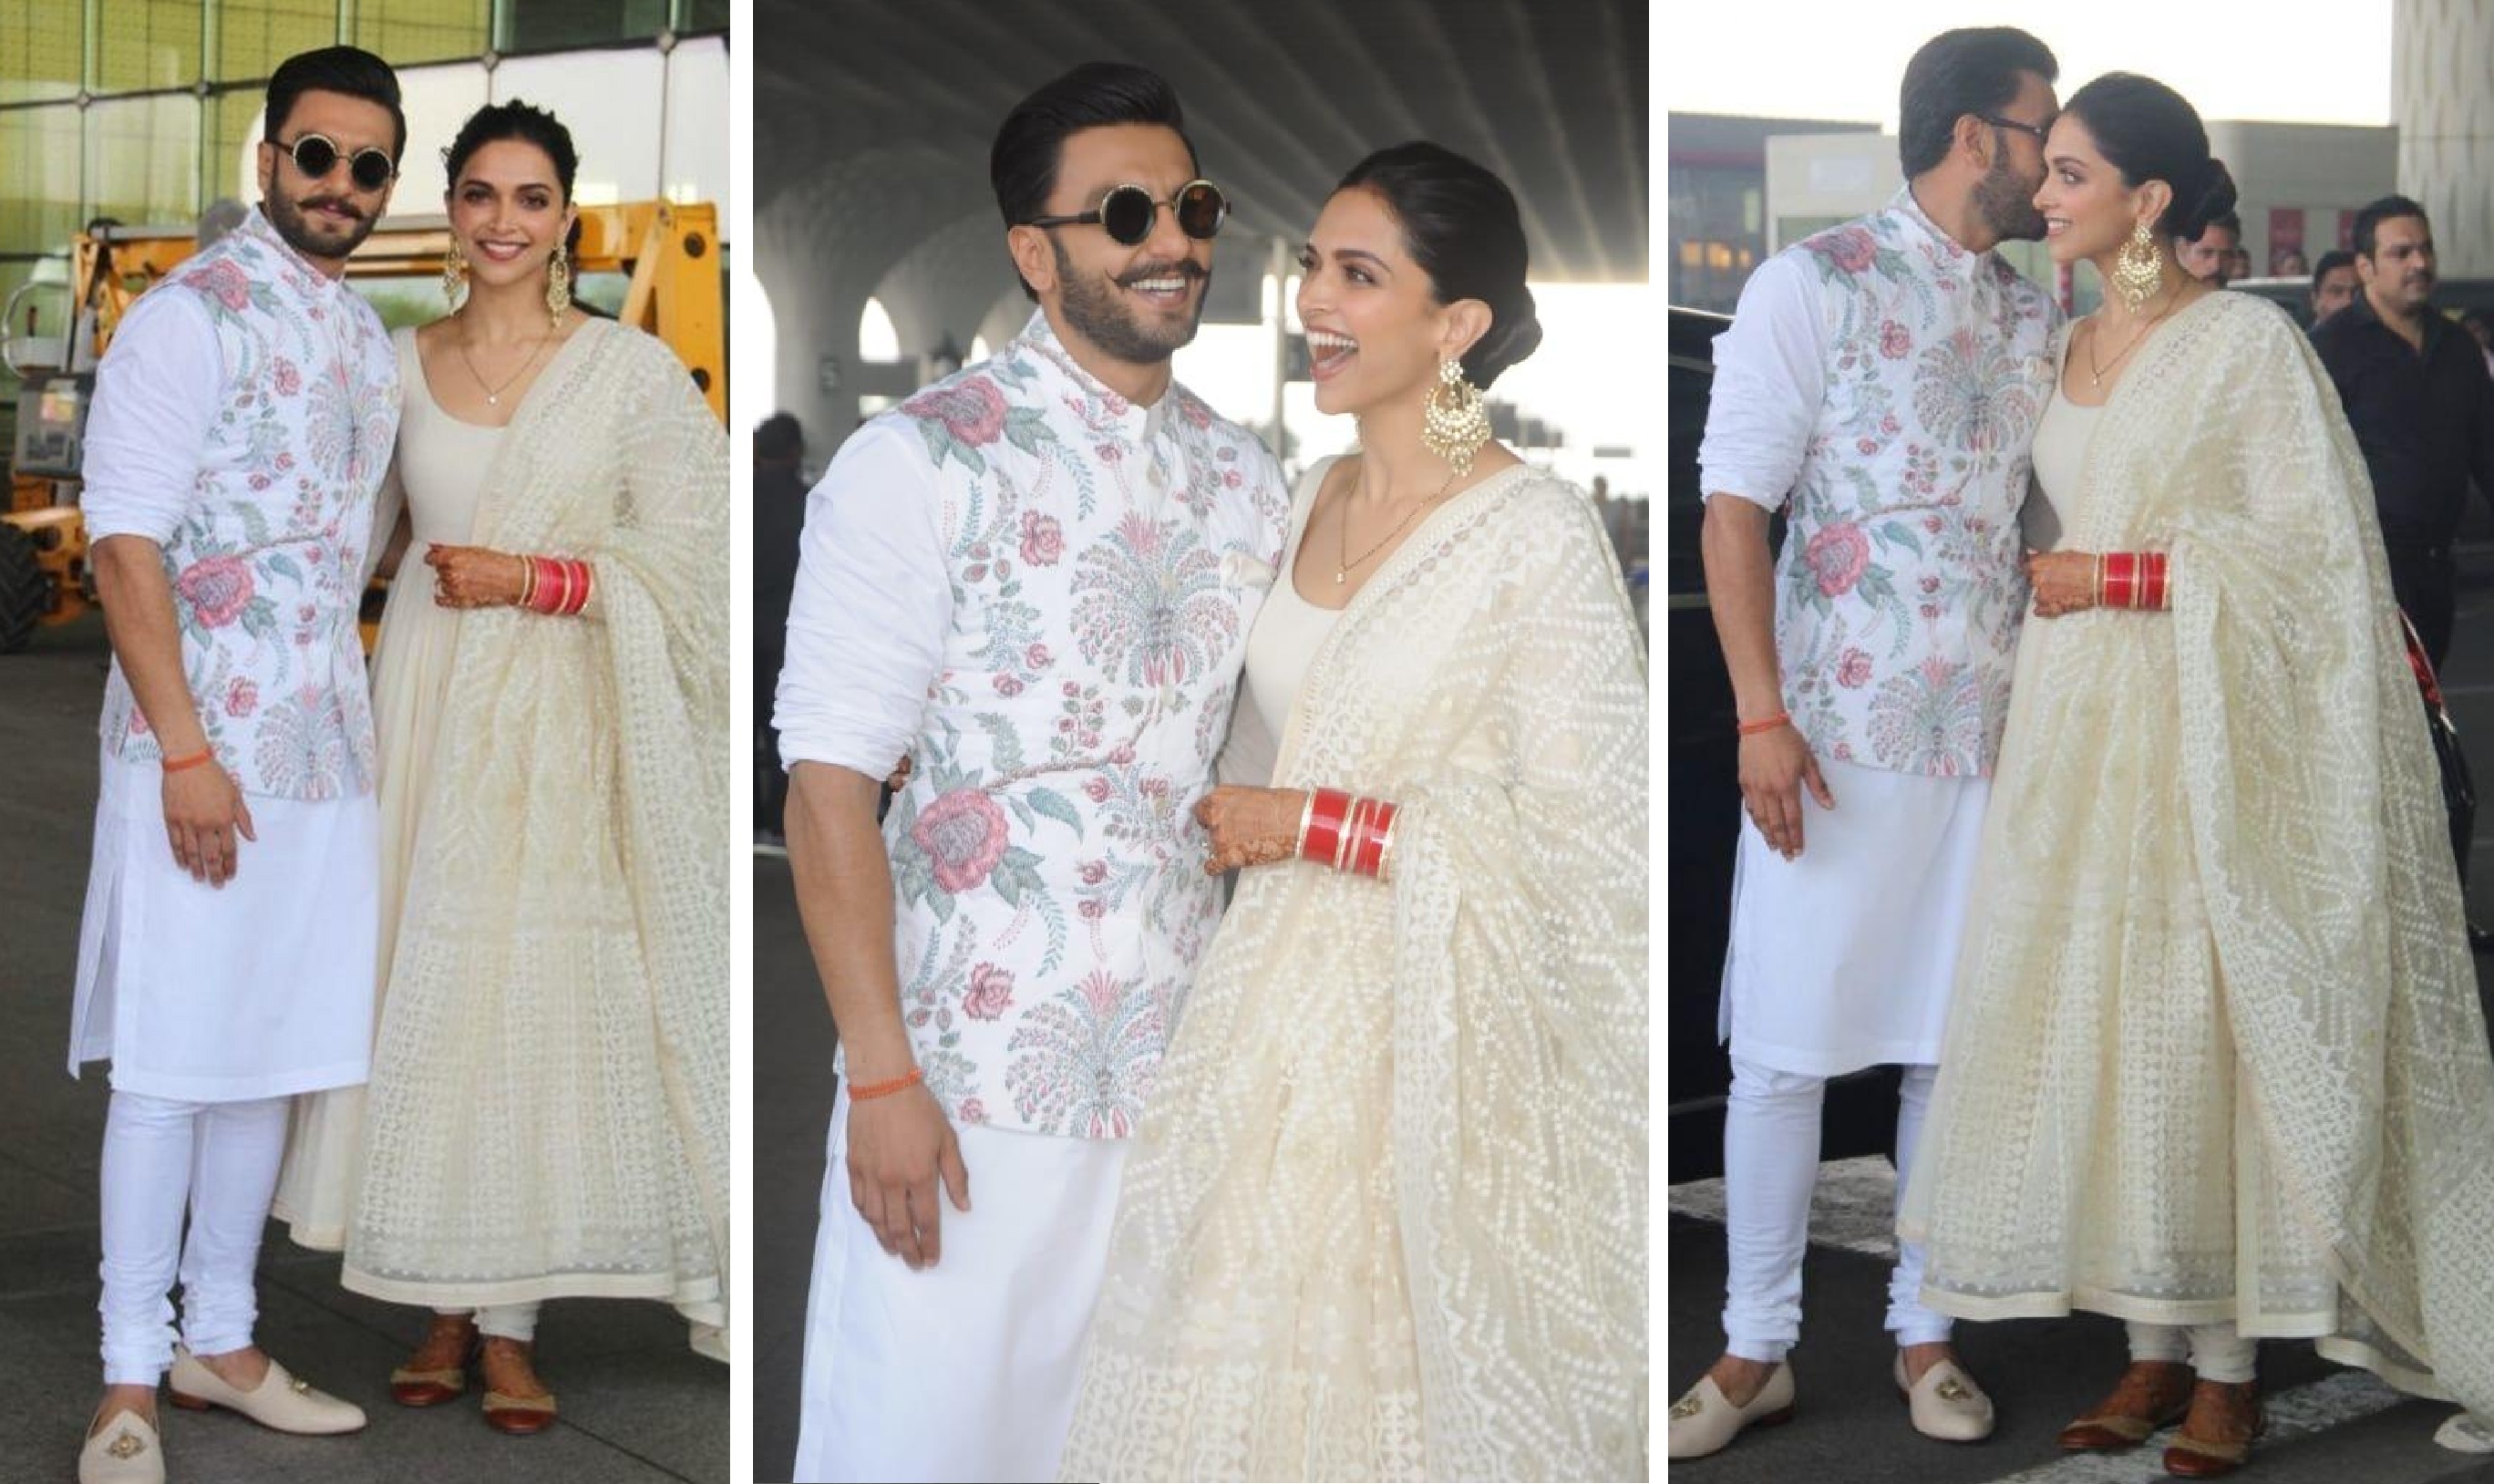 Deepika and Ranveer Gleamed in Matching White-Outfits, As They Head For Bengaluru